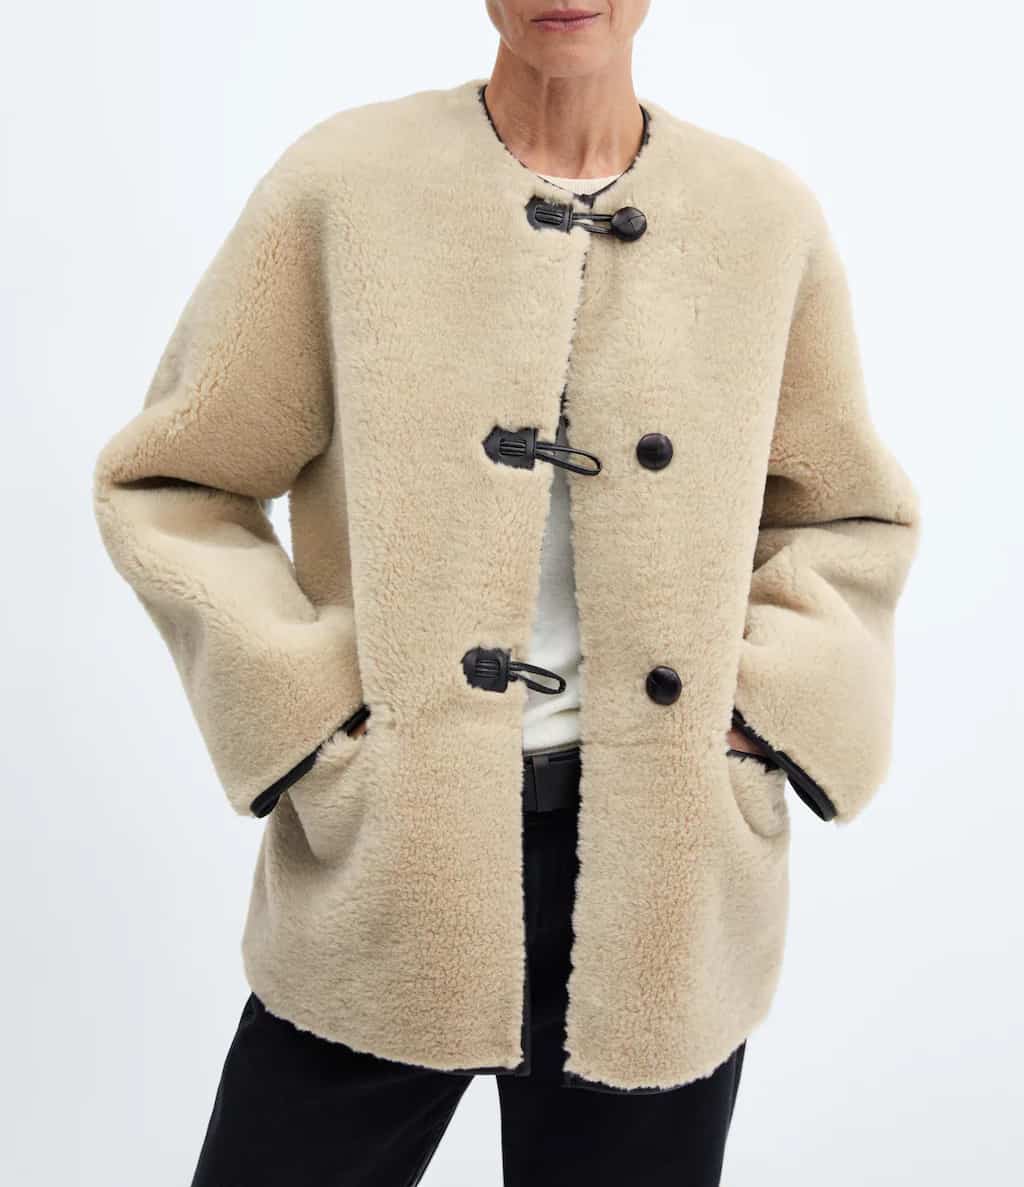 image of an ivory shearling coat with black buttons that is a dupe of the Toteme shearling coat